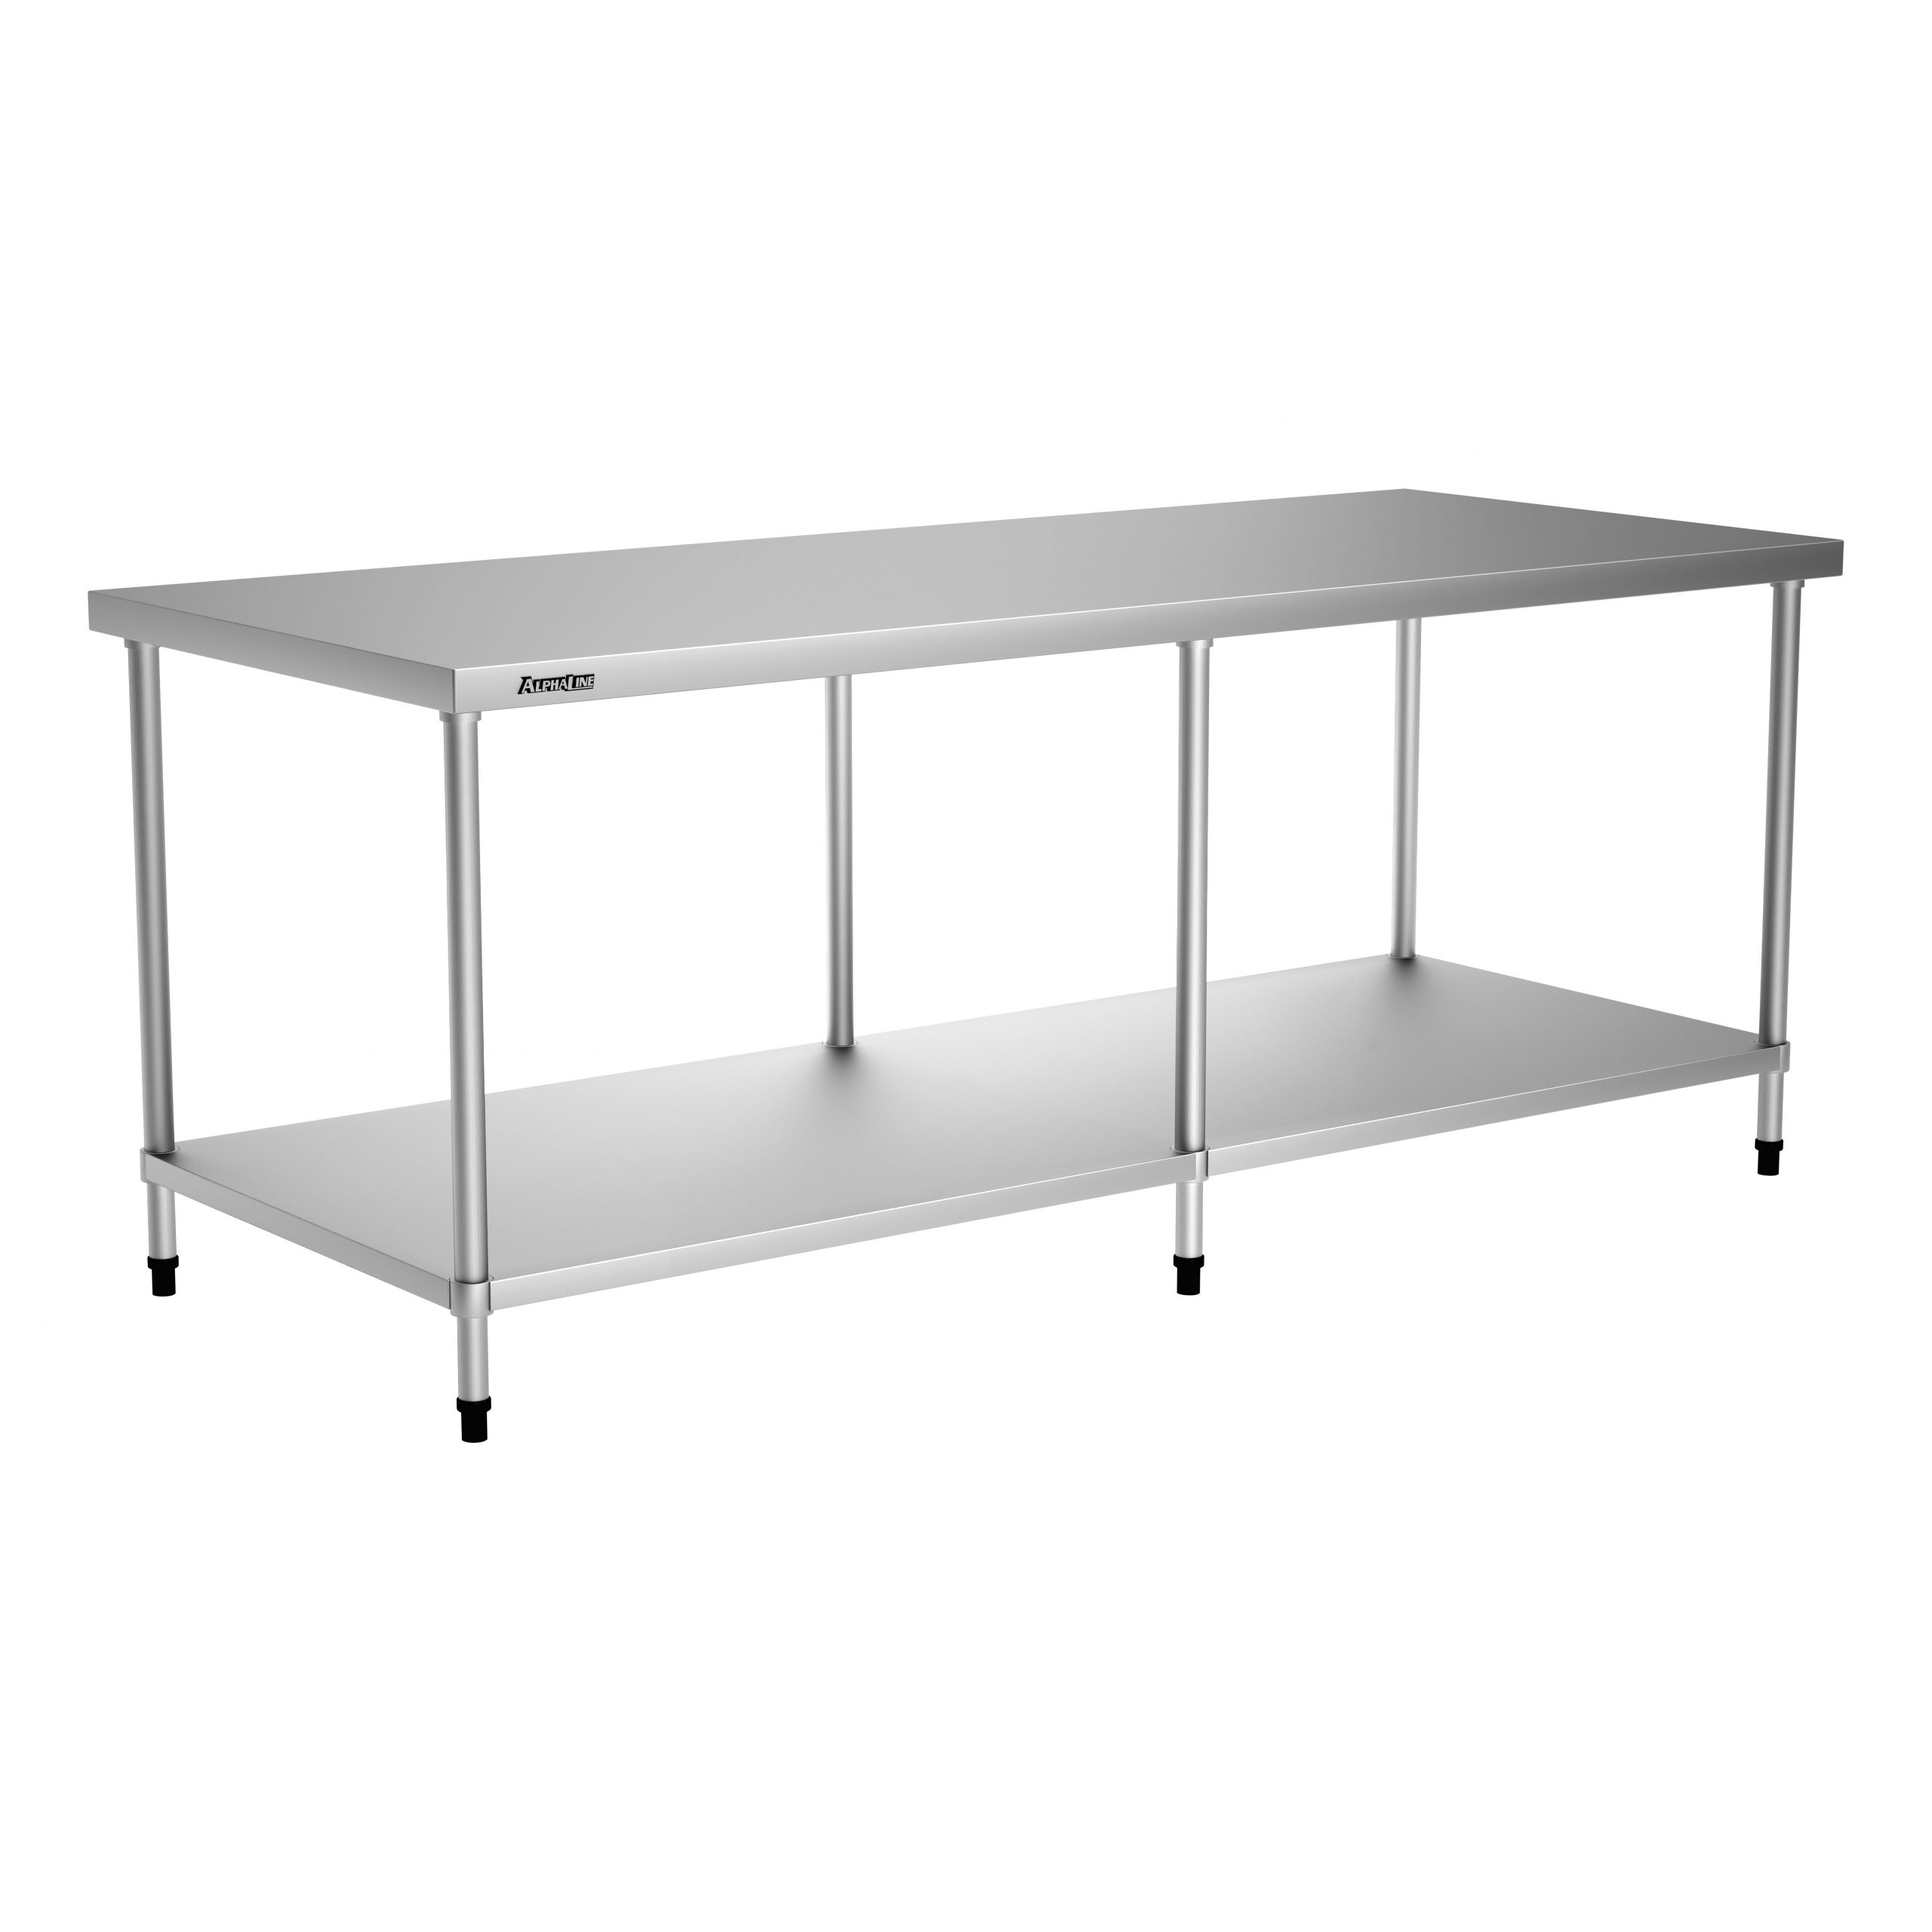 Stainless Steel Bench 2200 x 900